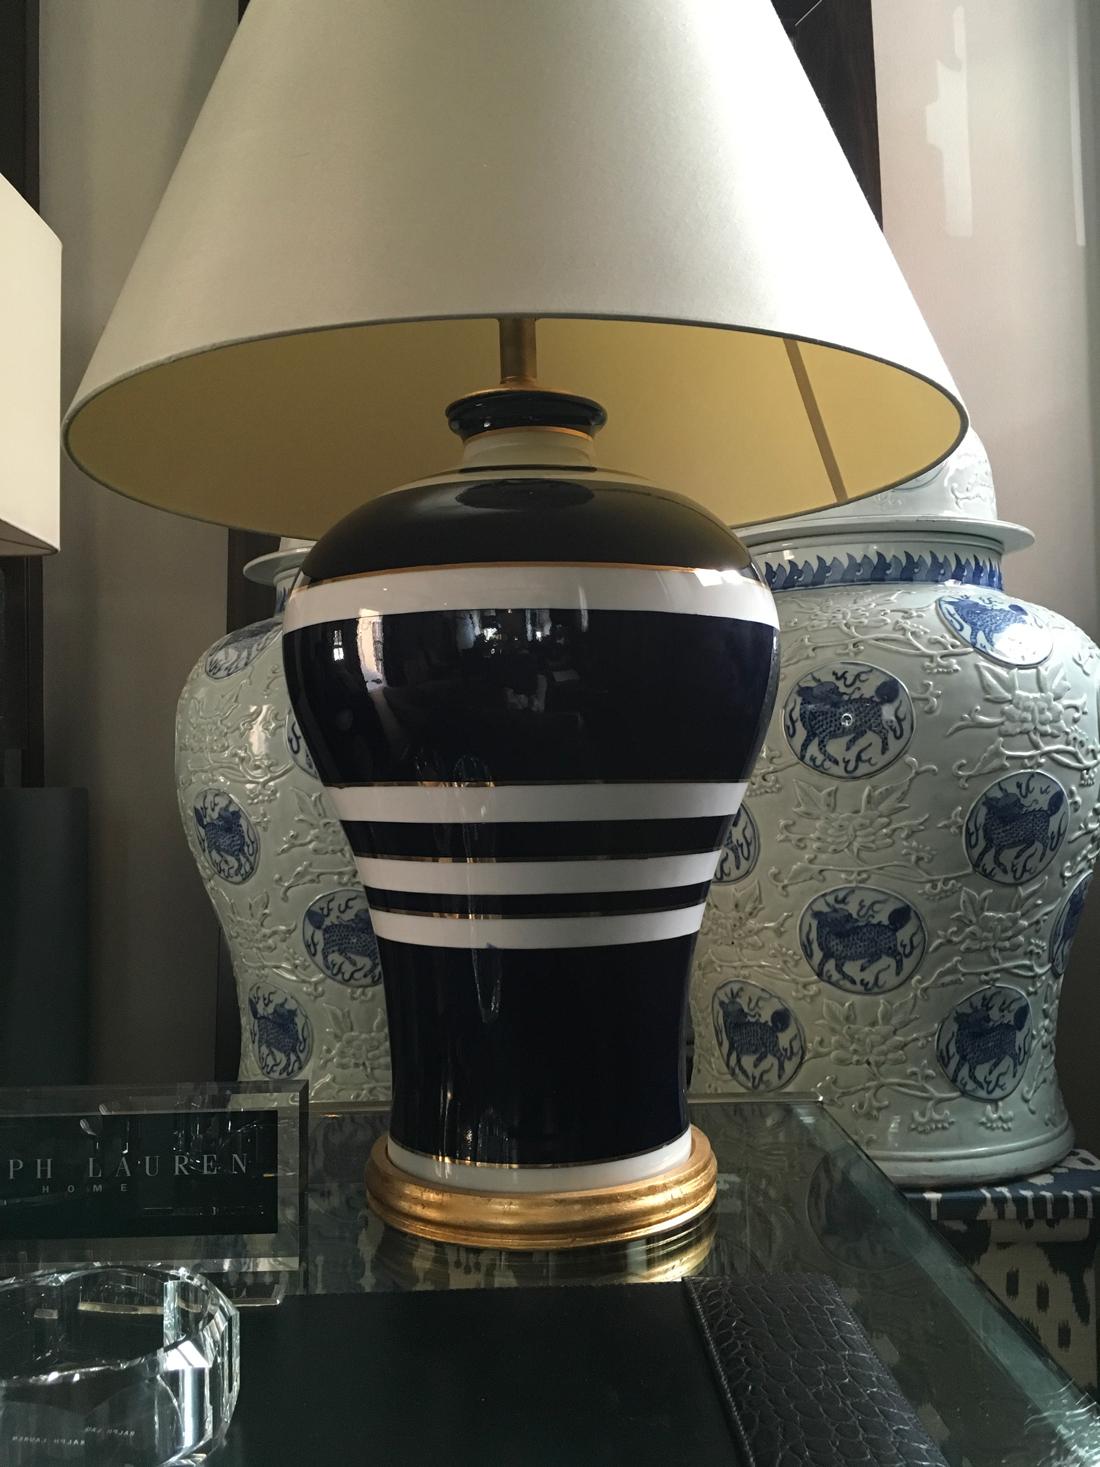 ralph lauren lamps blue and white